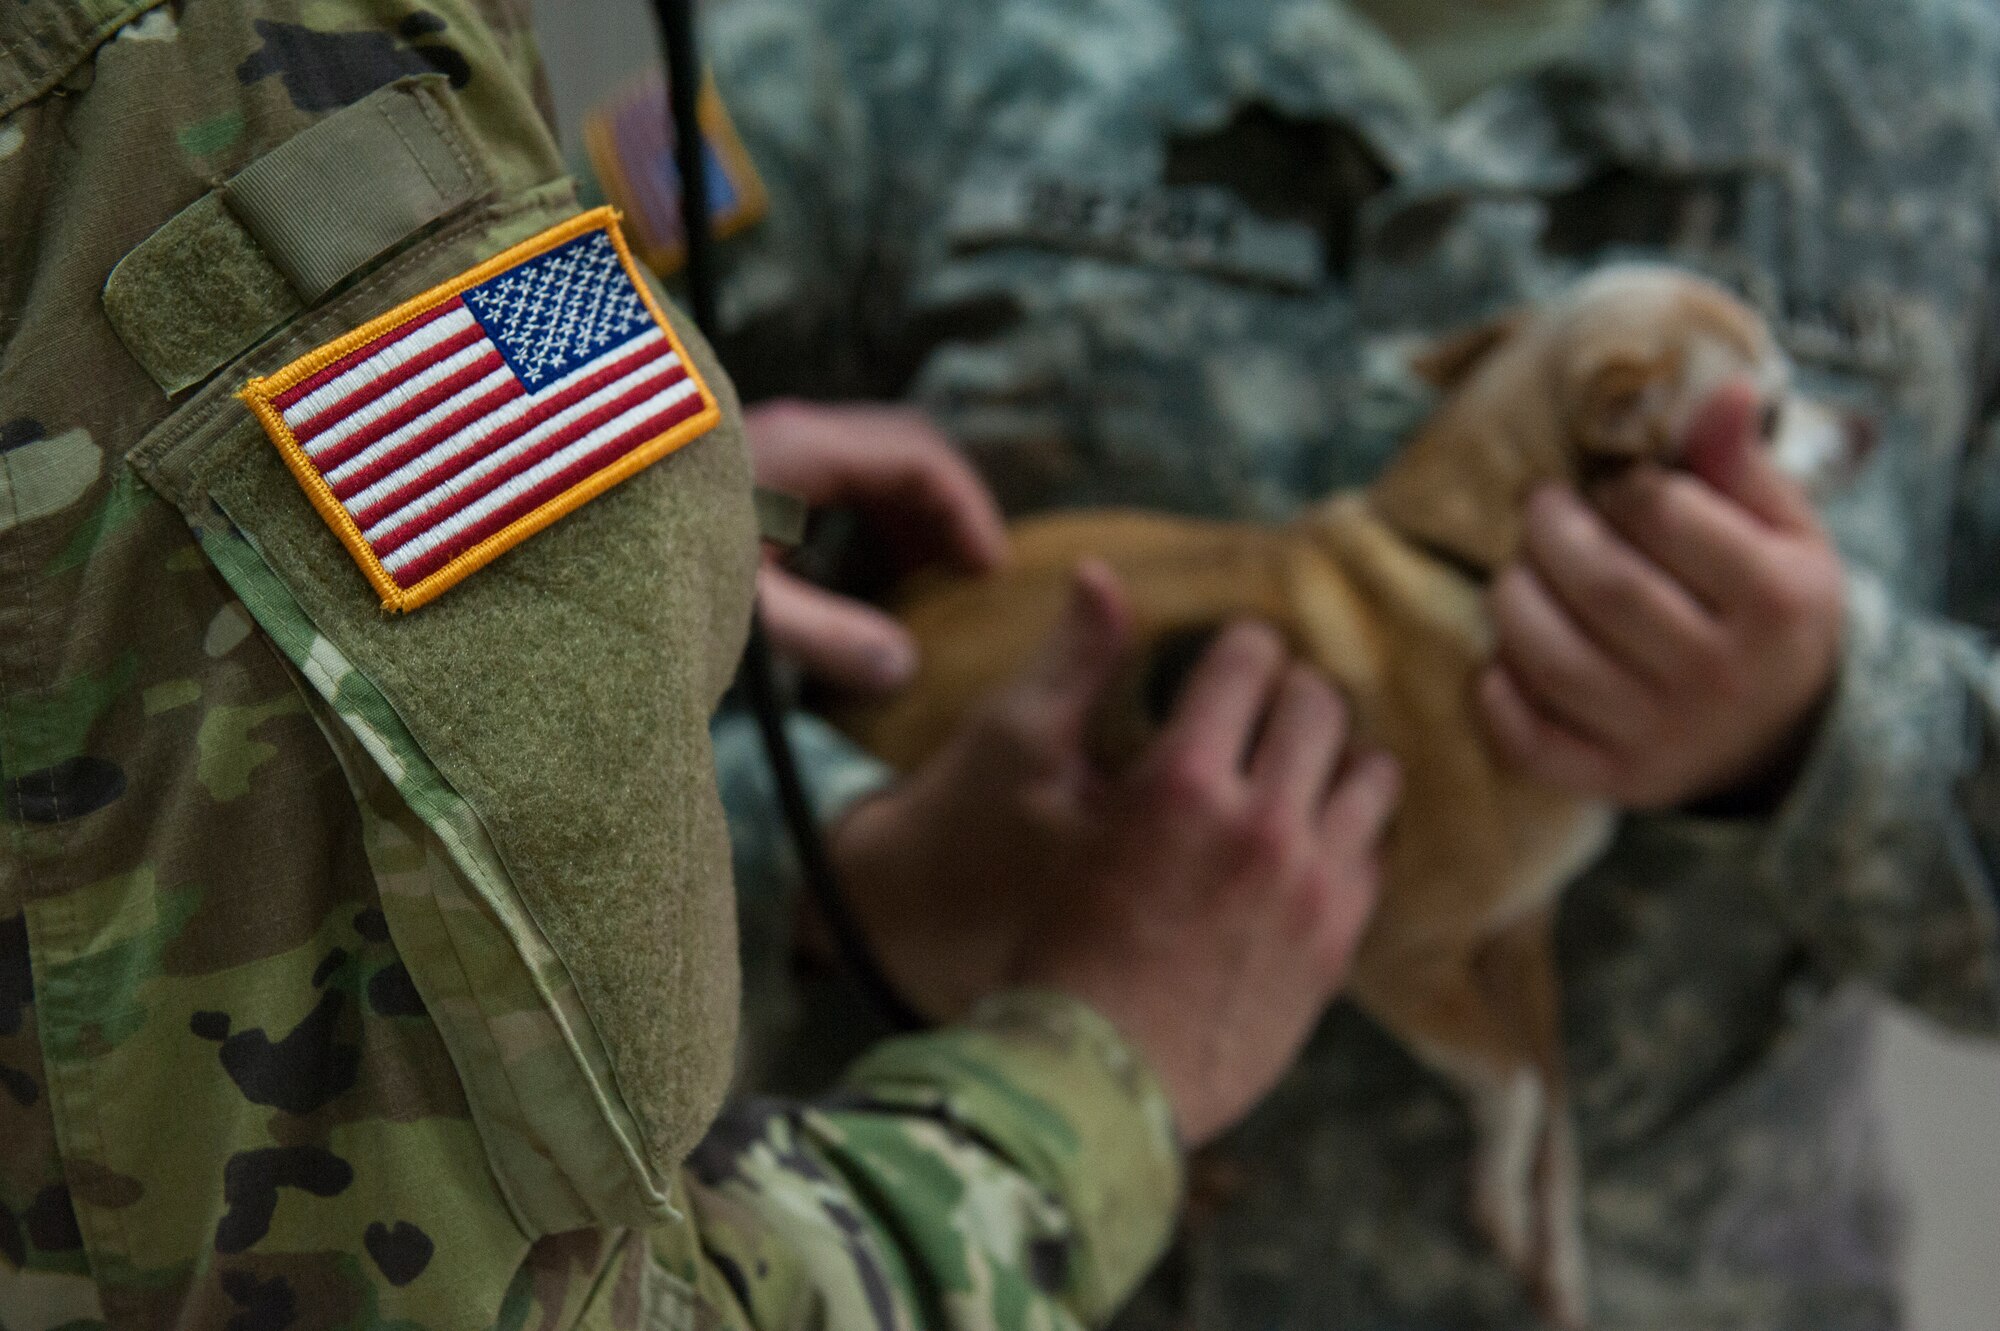 U.S. Army Capt. Drew Henschen, 39th Medical Group veterinarian, and Sgt. 1st Class Eduardo Quezada, 39th MDG veterinary technician, examine a pet during an ordered departure processing line, March 31, 2016, at Incirlik Air Base, Turkey. The pets were examined to ensure they were healthy enough to fly out with their owners. (U.S. Air Force photo by Tech. Sgt. Joshua Jasper/Released)